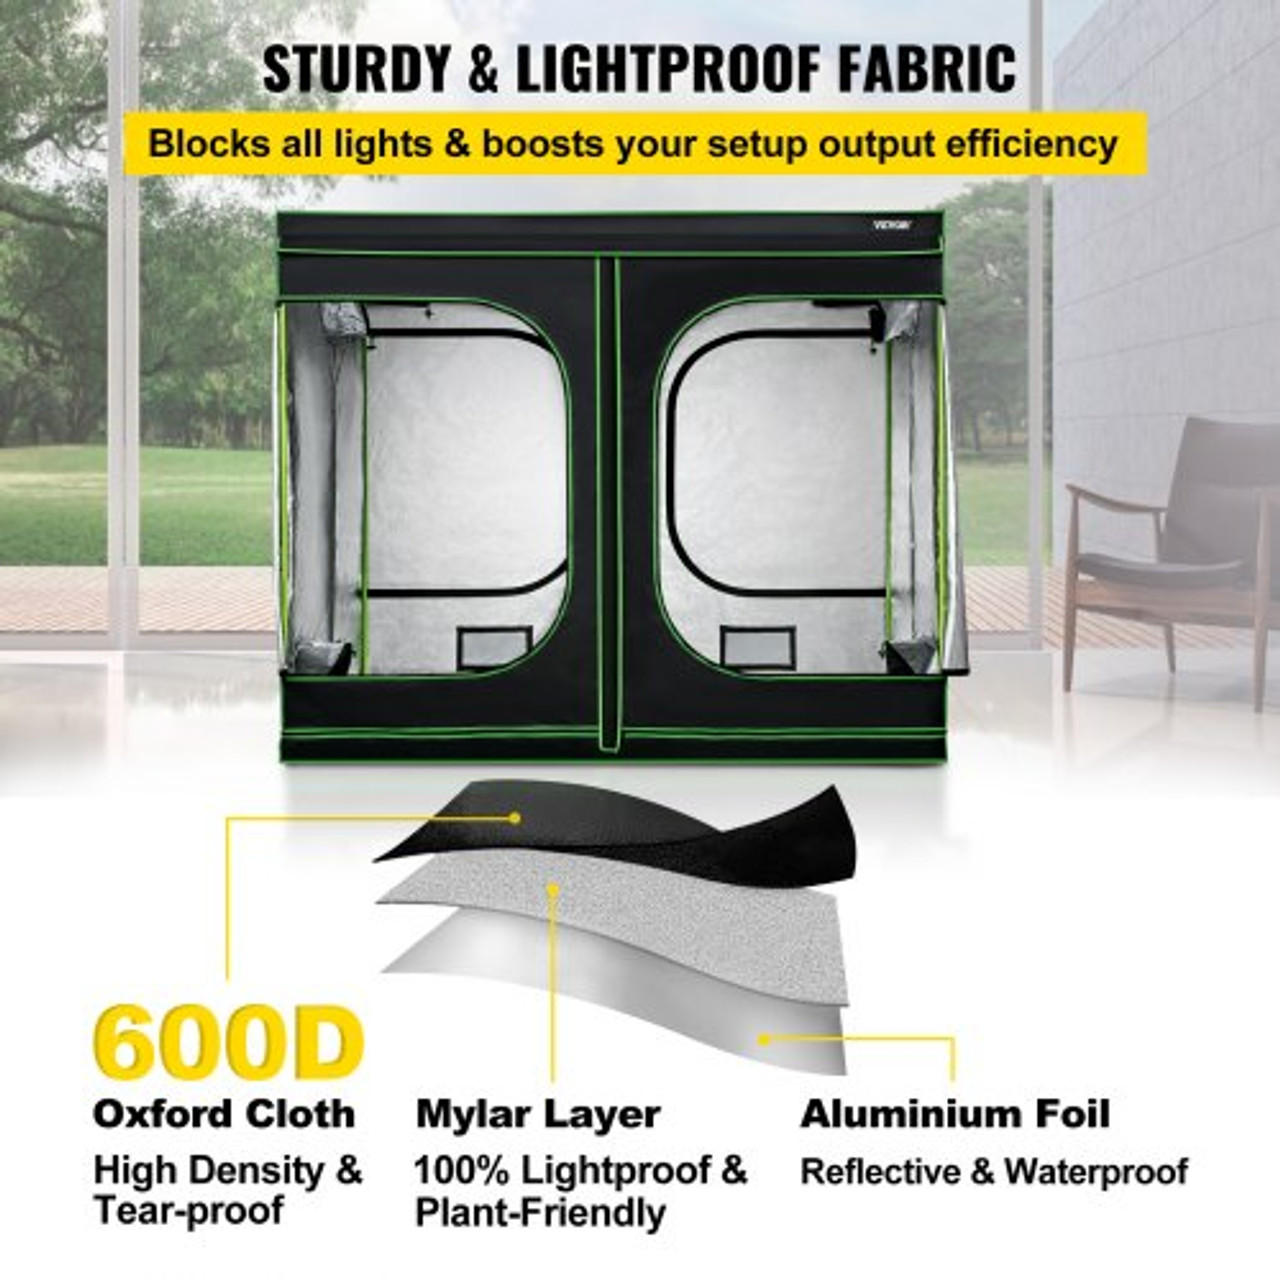 Grow Tent, 120" x 60" x 80" Hydroponics Mylar Grow Room with Observation Windows and Removable Floor Tray, 100% Lightproof Grow Closet for Indoor Plants Growing - 10'x5' Reflective Plant Tent